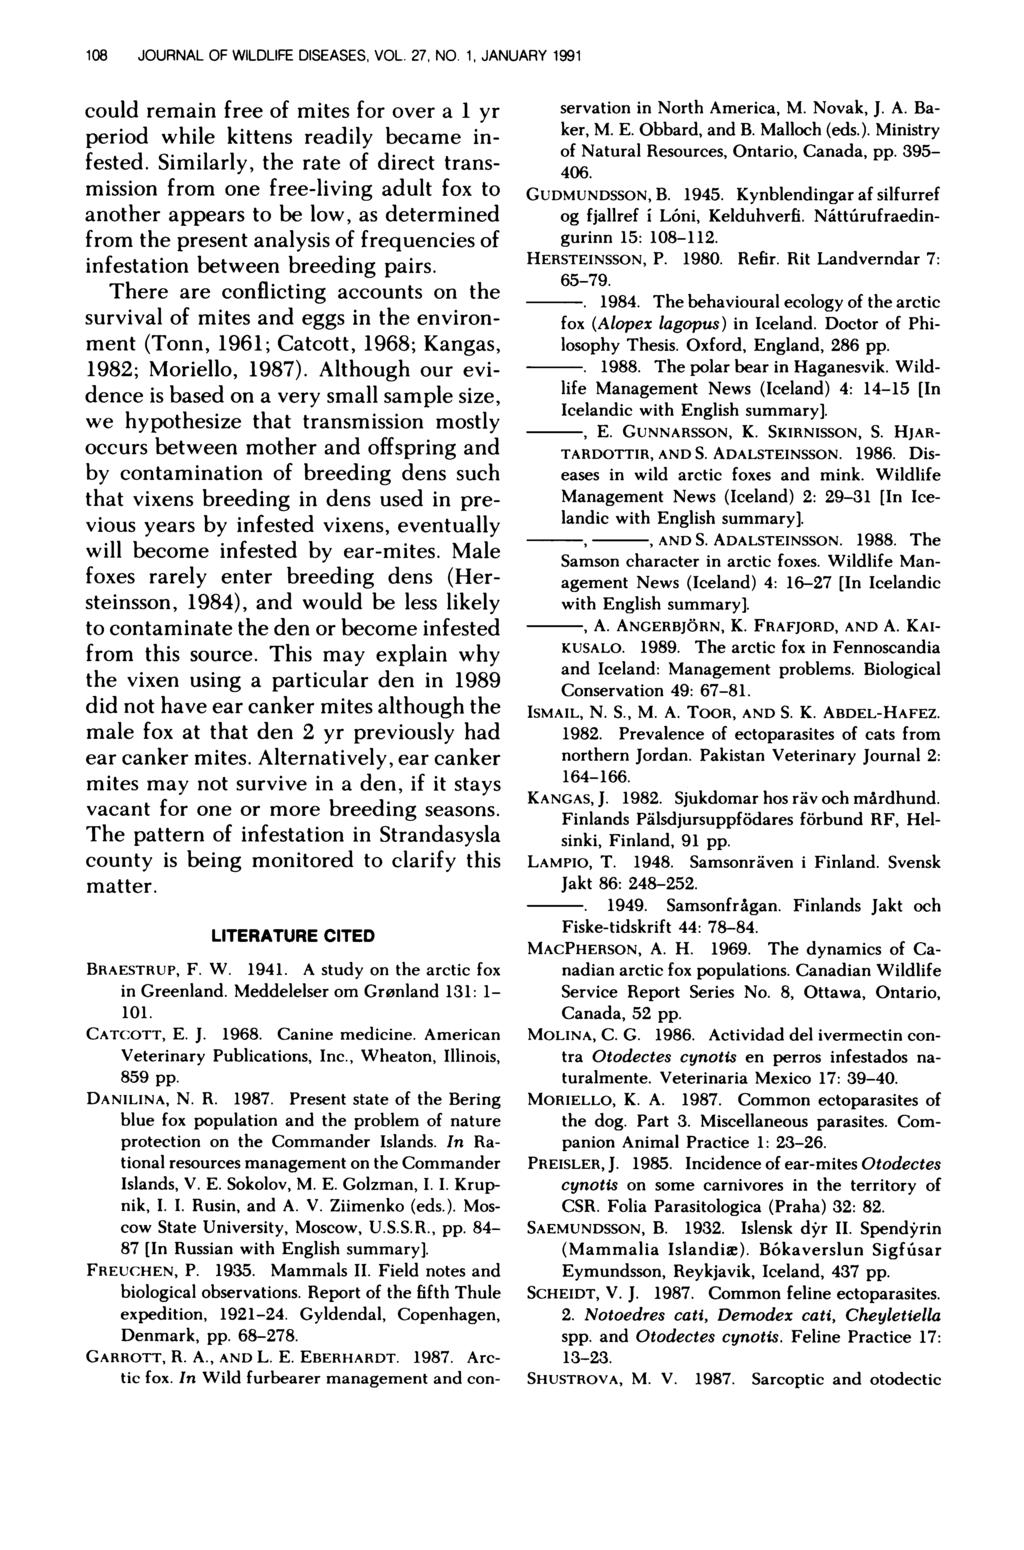 108 JOURNAL OF WILDLIFE DISEASES, VOL. 27, NO. 1, JANUARY 1991 could remain free of mites for over a 1 yr period while kittens readily became infested.